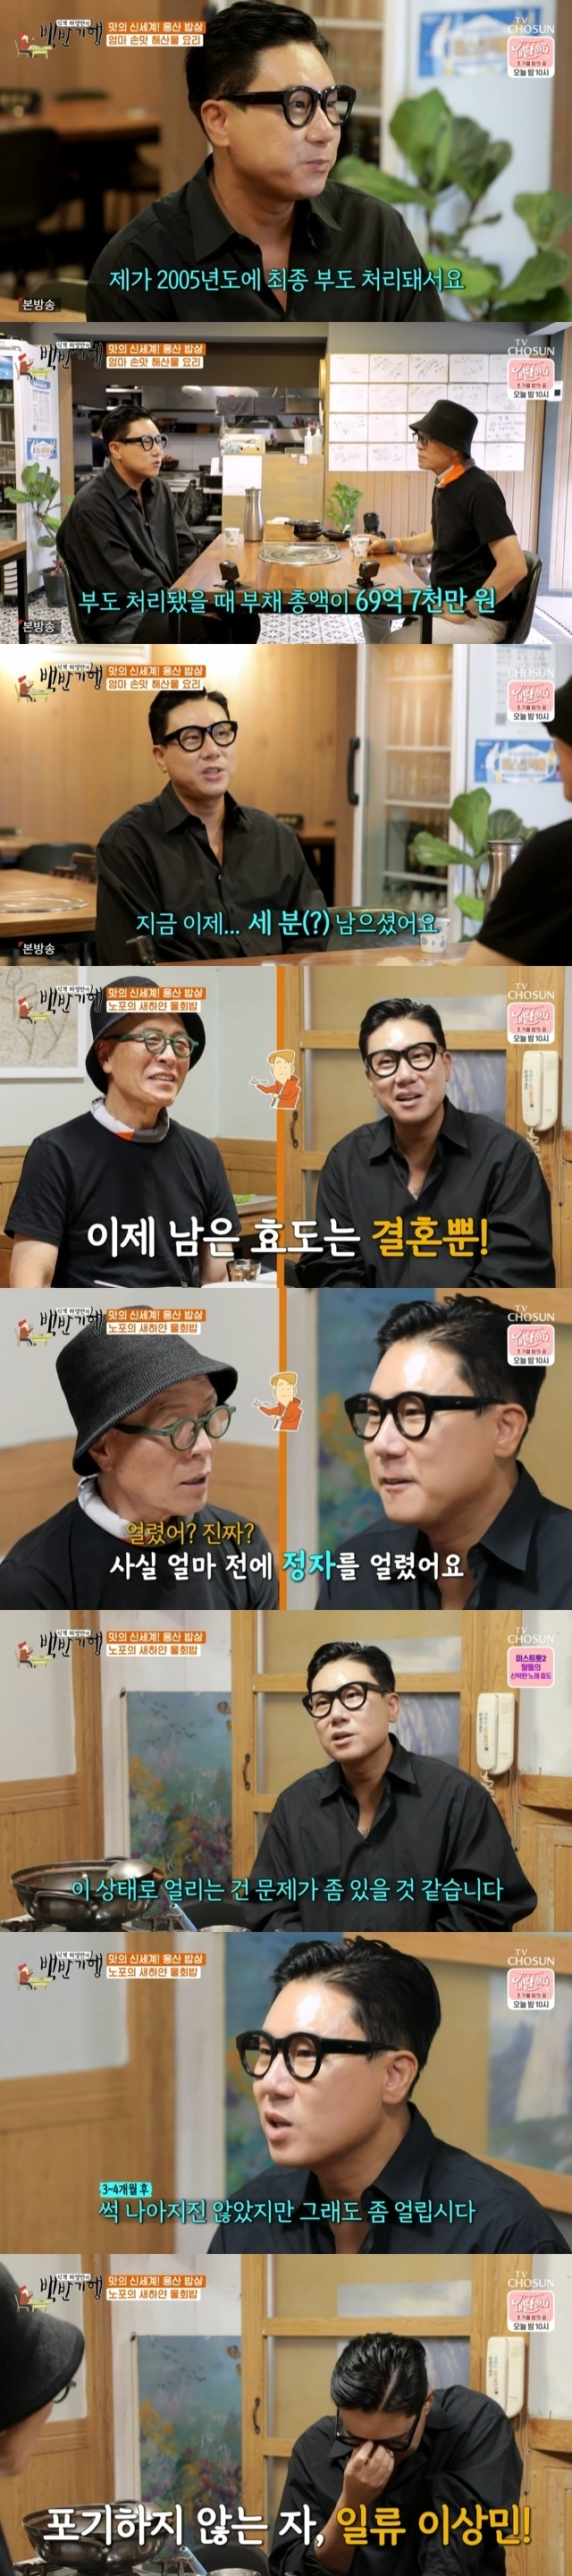 Lee Sang-min conveyed his life history that he had been struggling with dues to debt, and he was now preparing for a stable future.In the 119th episode of the TV Chosun Huh Young Mans Food Travel (hereinafter referred to as White Travel) broadcast on September 3, the Yongsan District table tasting tour with Lee Sang-min, a broadcaster from the group Lula, was drawn.Lee Sang-min, who met Huh Young-man and Yongsan District on a glance, told Huh Young-man, I like high places and I do not like it below.I have a little bit of notice, he said, and had a pleasant first meeting. It was a sensible word for the restoration icon.Lee Sang-min was the first to say about his debt: It was finally defaulted in 2005, when the total debt was 6.97 billion won.It was a huge sum of about 7 billion.Lee Sang-min told Huh Young-man, who asked if he had reimbursed all his current debts, Now (Bondza) has three minutes left, and said he was still trying, not worried and frustrated.Huh Young-man said, If you look at Lee Sang-min, you can think of a first-class person, a second-class person, a crying person.Lee Sang-min replied to the question about his usual hobby: Shoes, clothes collection.Especially, the fact that the current shoes are about 400 pairs surprised Huh Young-man.Lee Sang-min said, Even when all the differential pressure tickets were attached, shoes and clothes were missing from the foreclosure items. He boasted that his current shoes were 200,000 won, but the current price was 1 million won.Lee Sang-min recalled his childhood and mother when he found the old gun in an alleyway in Yongsan District on the same day; Lee Sang-min said, My mother had a stall.It was just this structure. I slept with my mother in the attic, and when I came to the guest, I avoided it for a while. When my mother was doing a Chinese restaurant in the telephoto, she said that she would run a bicycle to deliver a bowl.Lee Sang-min expressed his sadness by telling her that her mother is currently in hospital.Lee Sang-min has always described himself as a son like a traffic accident who surprised his mother by accident, and said, I want to say that when my mother is discharged, there is a woman who will marriage.He also naturally expressed concern.Lee Sang-min, who was born in 1973 and is 49 years old this year, sighed deeply with the words Even if I have a child next year, and said, I just froze the Chinese Pavilion because I wanted to have too much.